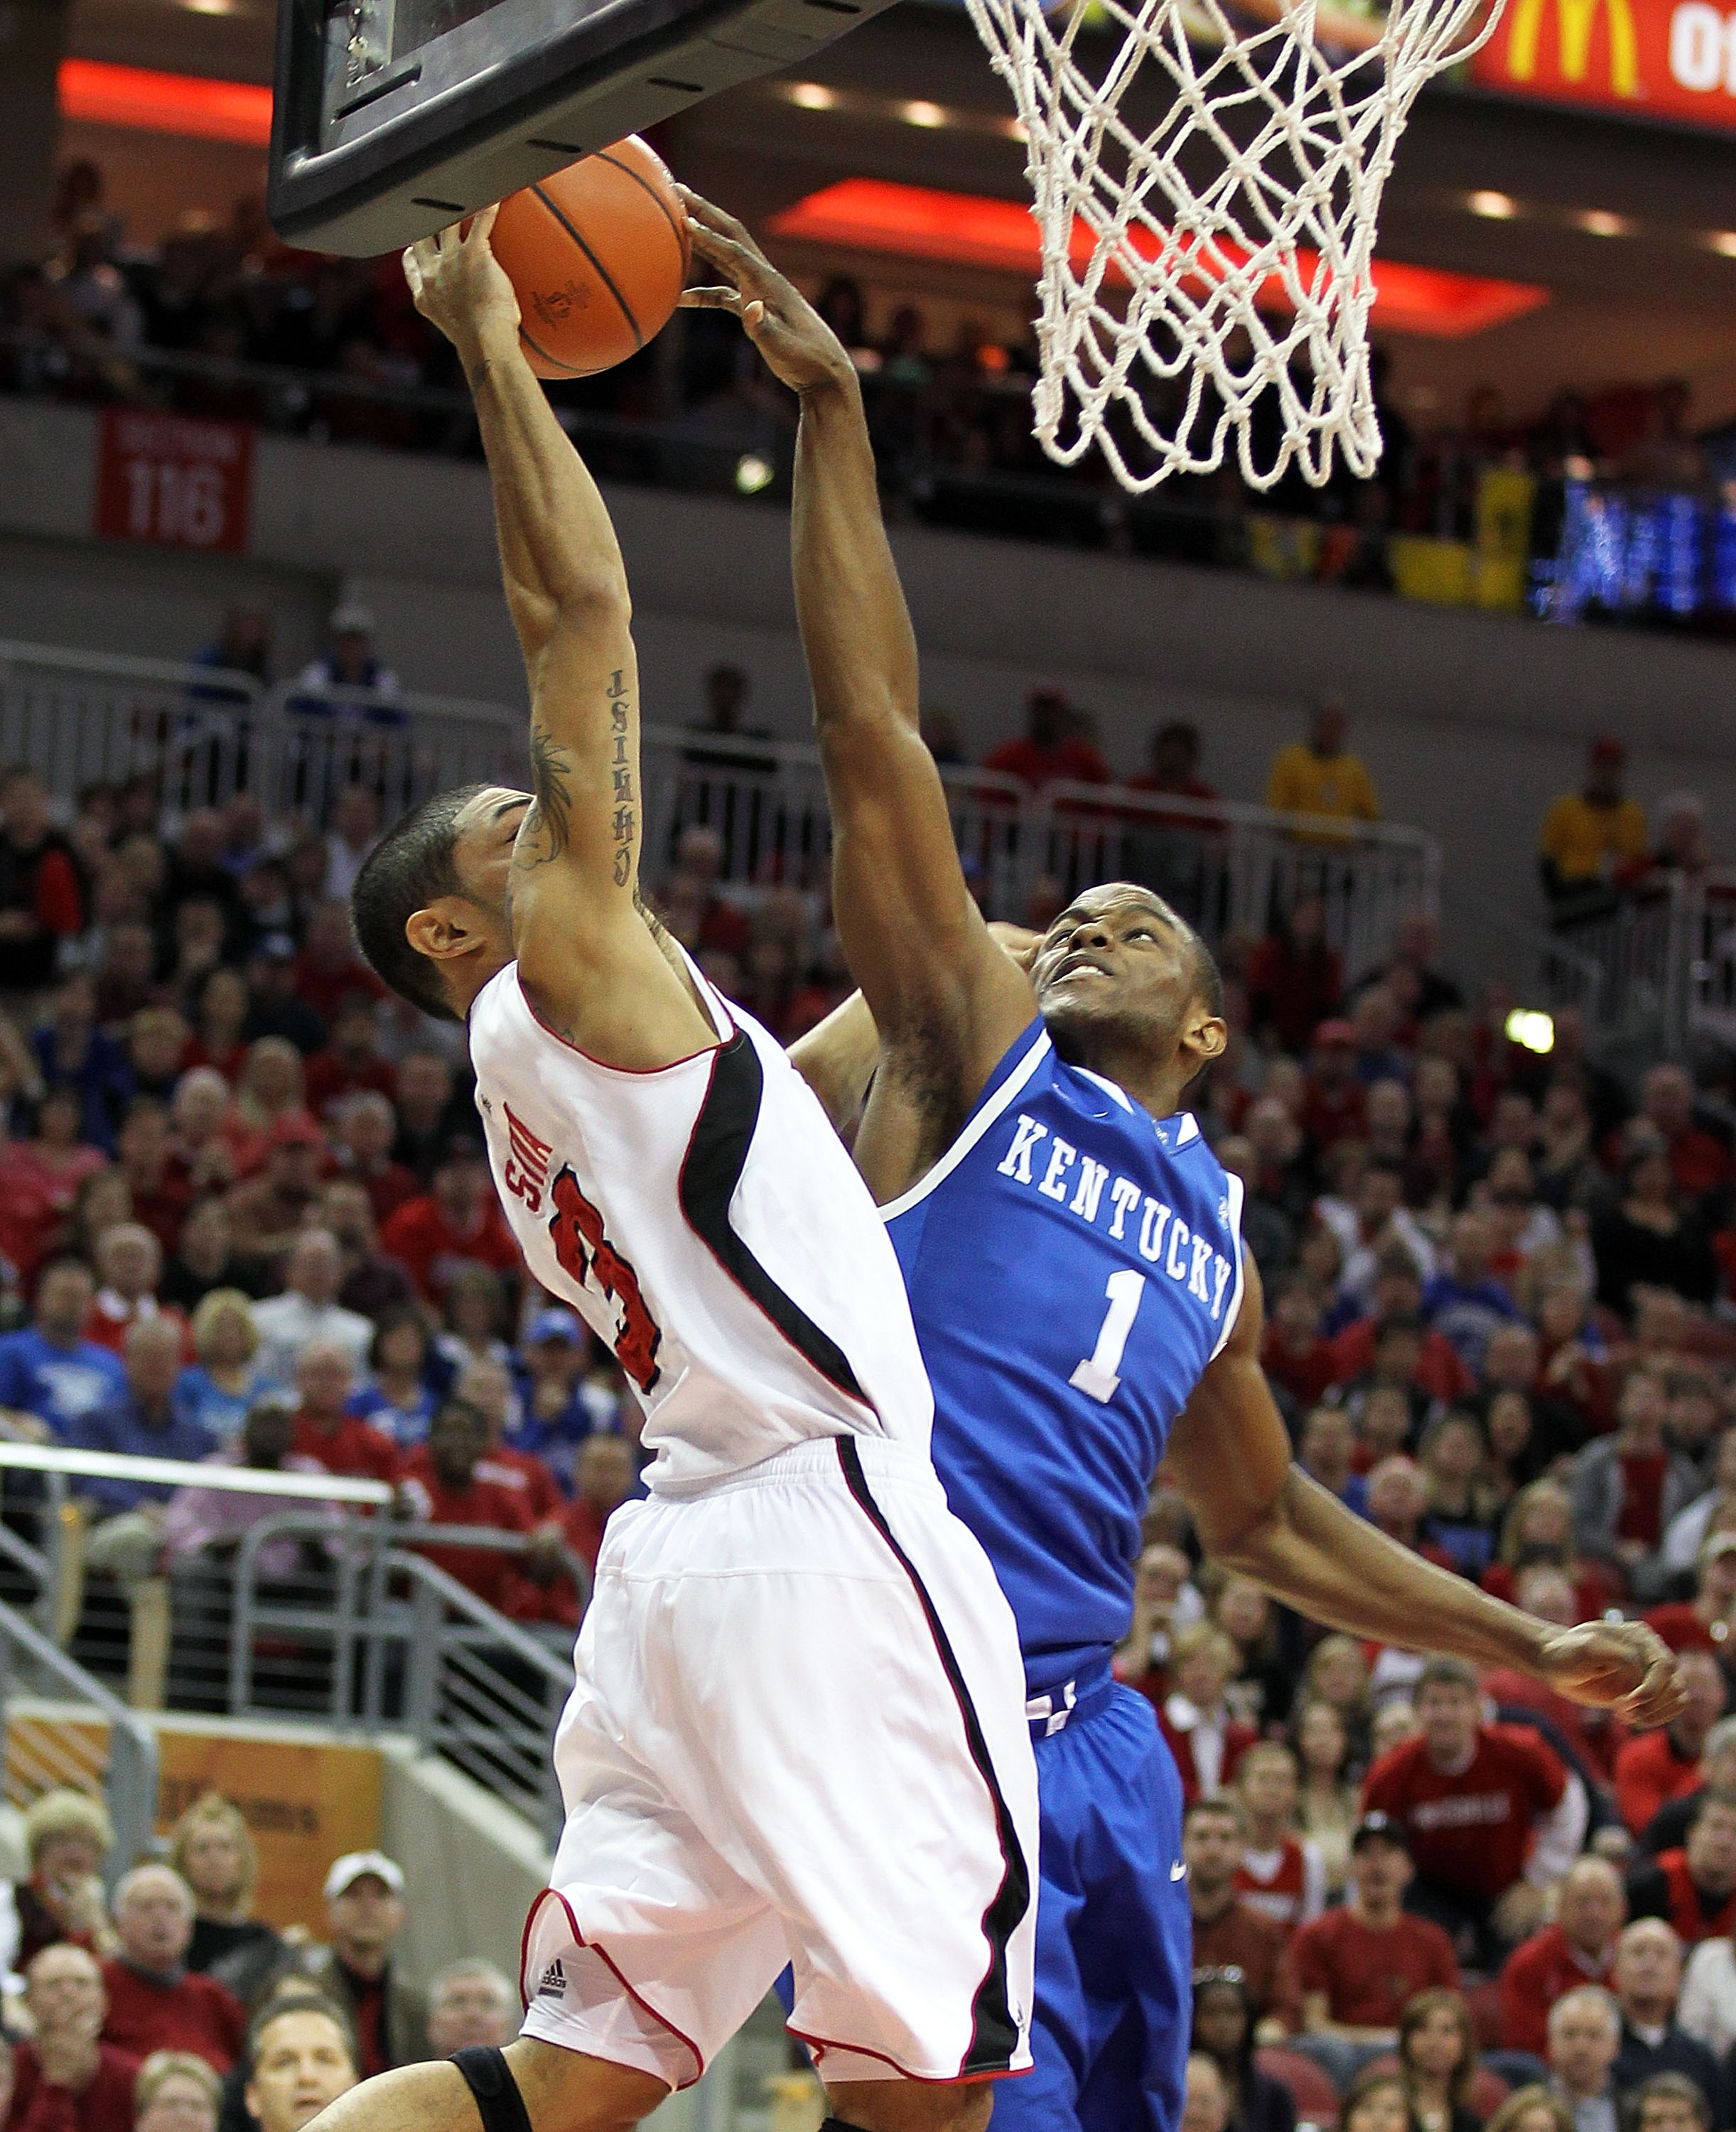 LOUISVILLE, KY - DECEMBER 31:  Peyton Siva #3 of the Louisville Cardinals has his shot blocked by Darius Miller #1 of the Kentucky Wildcats during the game at the KFC Yum! Center on December 31, 2010 in Louisville, Kentucky. Kentucky won 78-63.  (Photo by